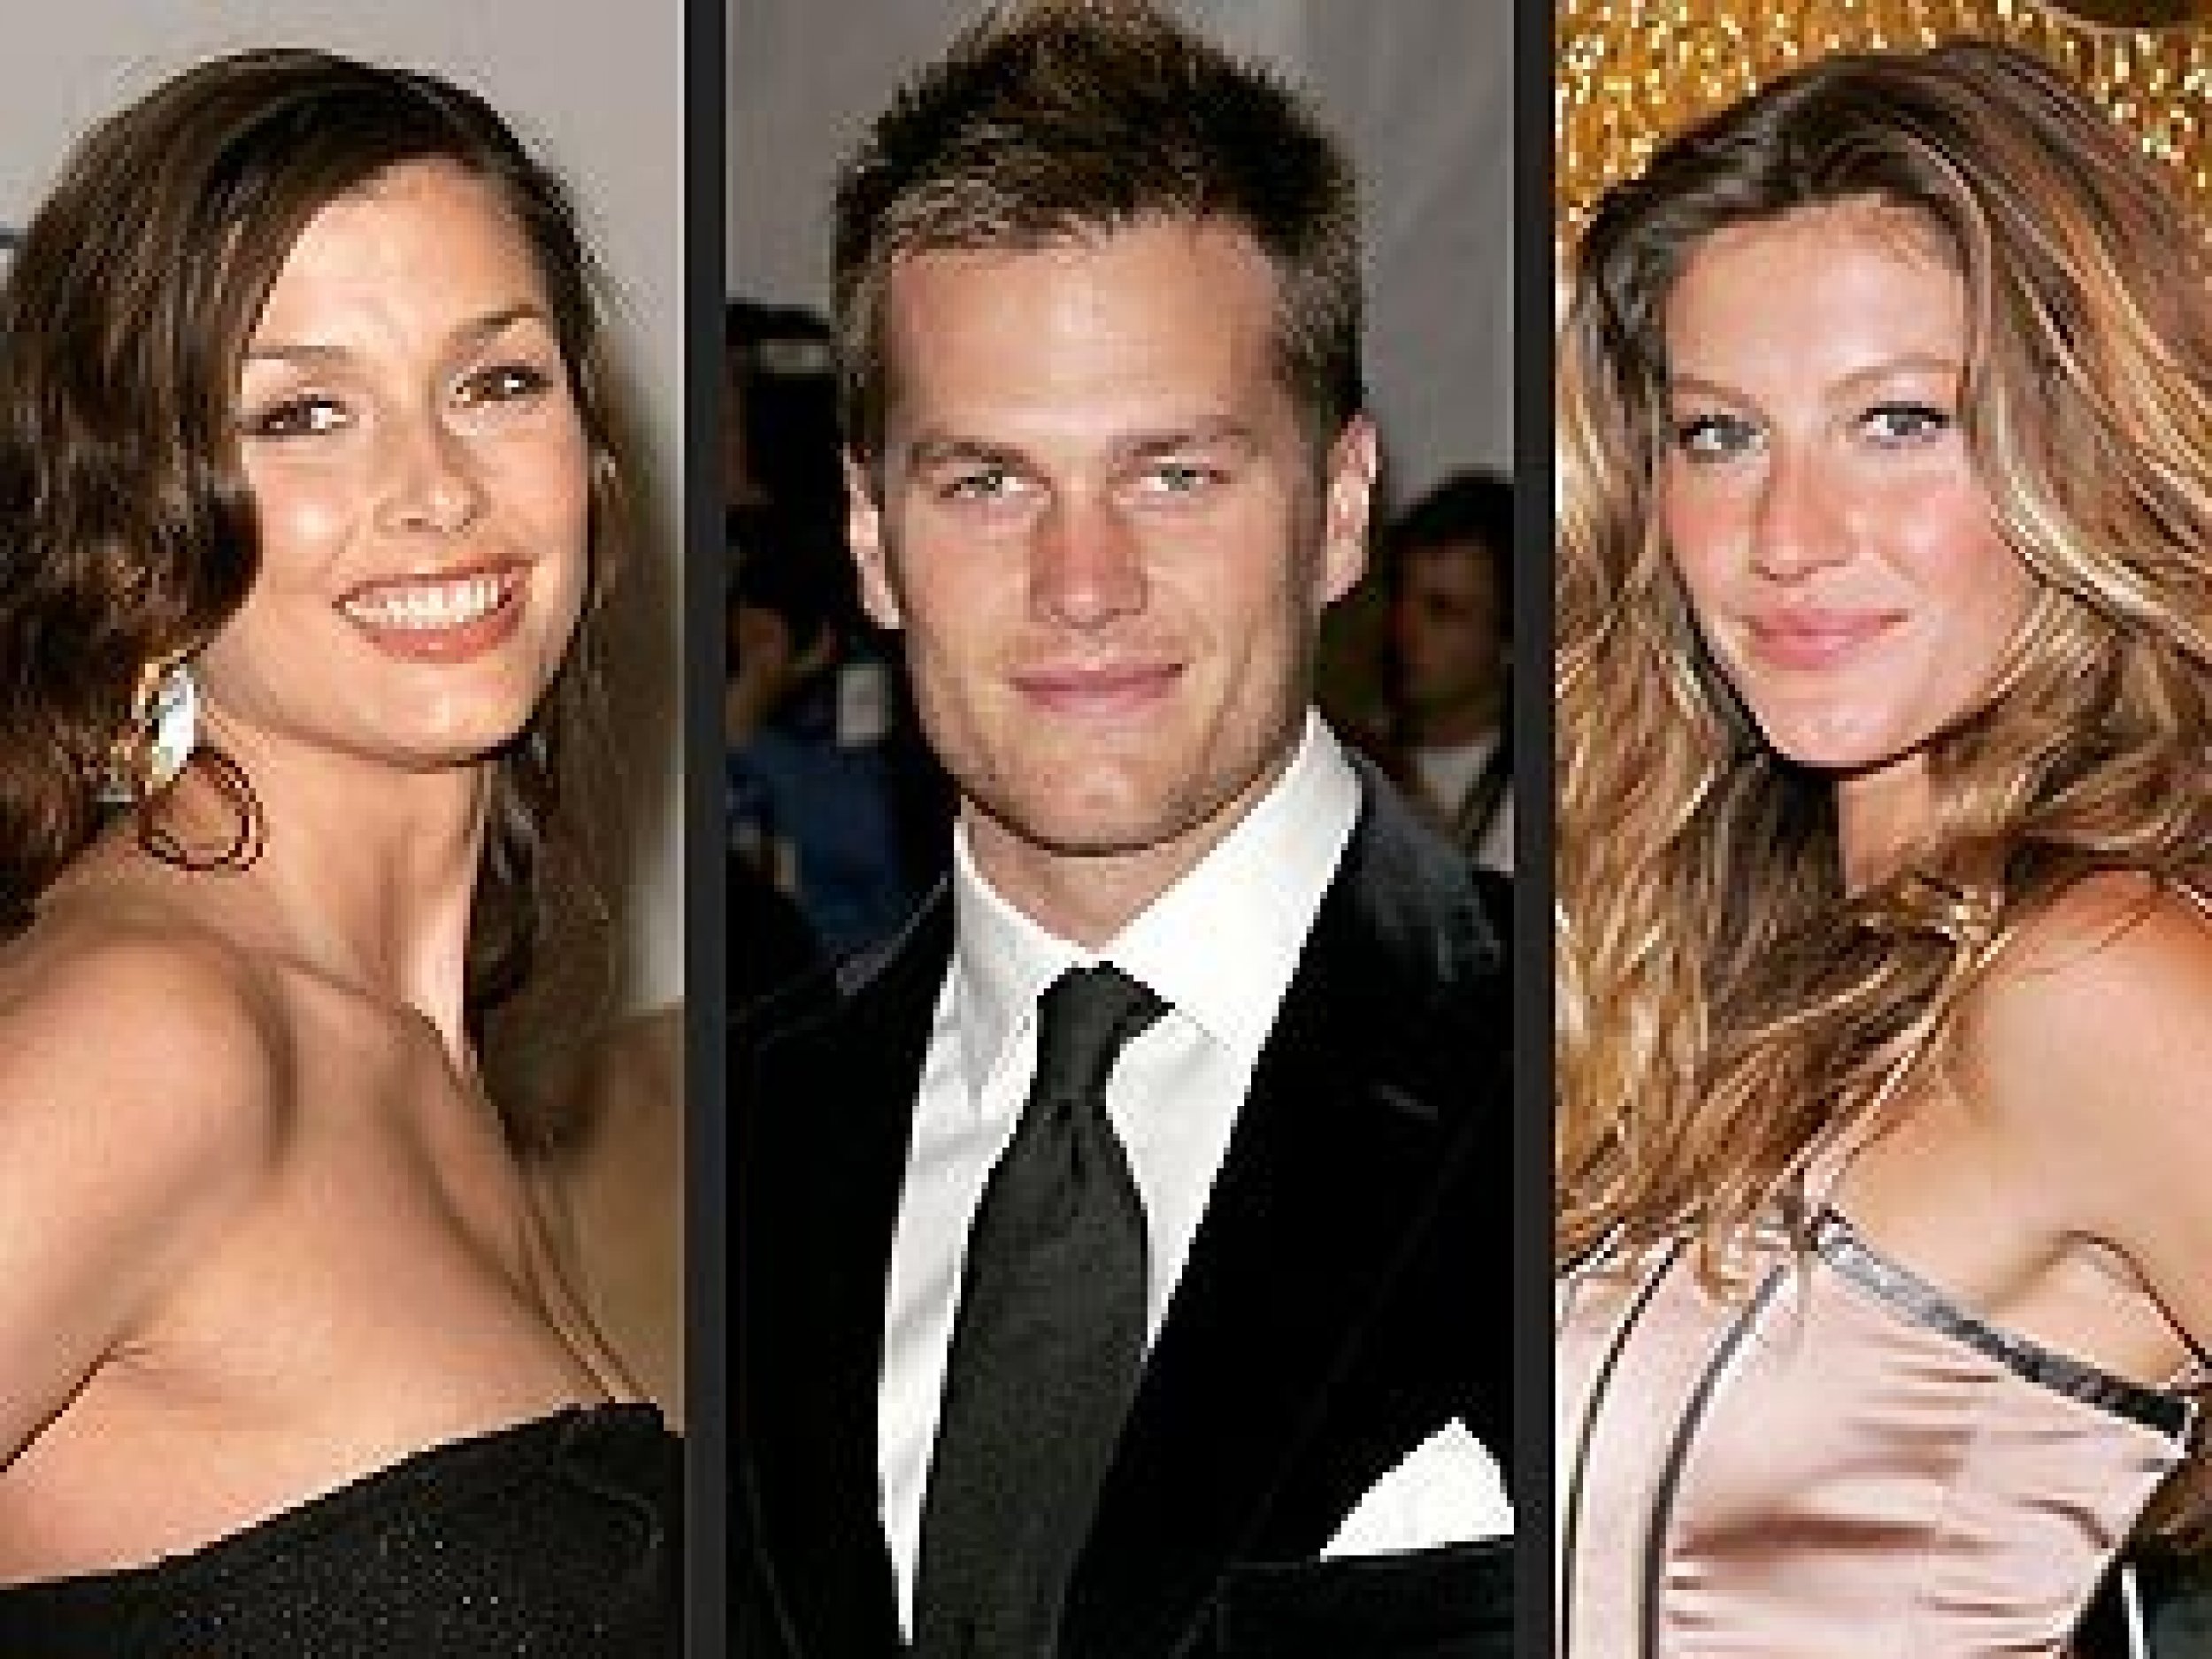 Tom Breaks Up with Bridget, and Moves on to Gisele